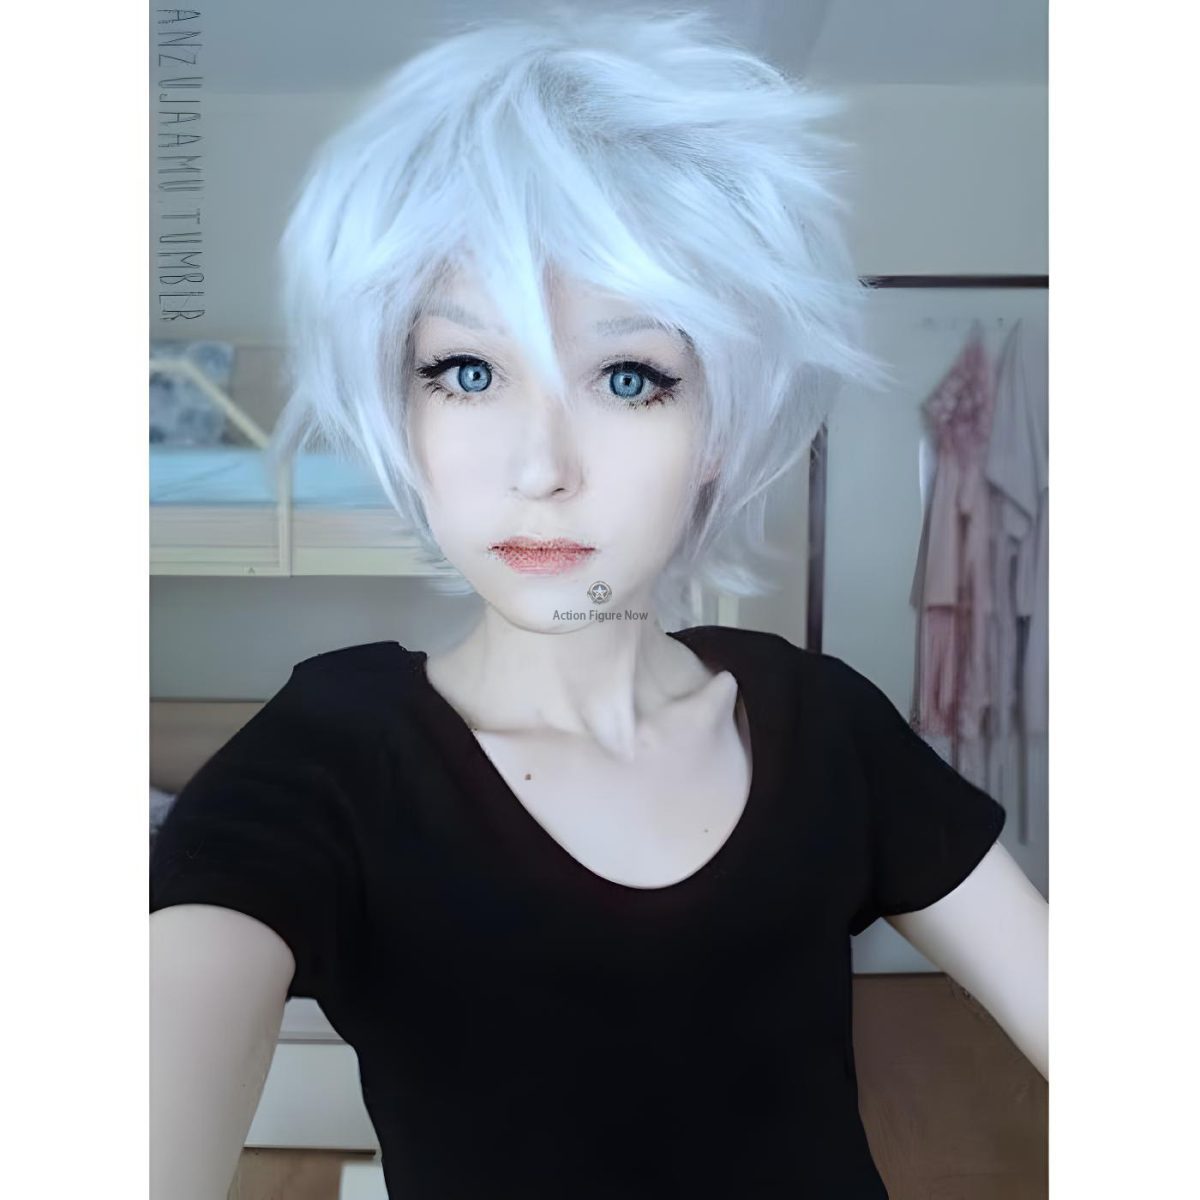 Cosplay Wig - K Isana Yashiro Anime Synthetic Hair Wavy Short Hair Heat Resistant Costume Cosplay Wigs for Halloween Party Wig